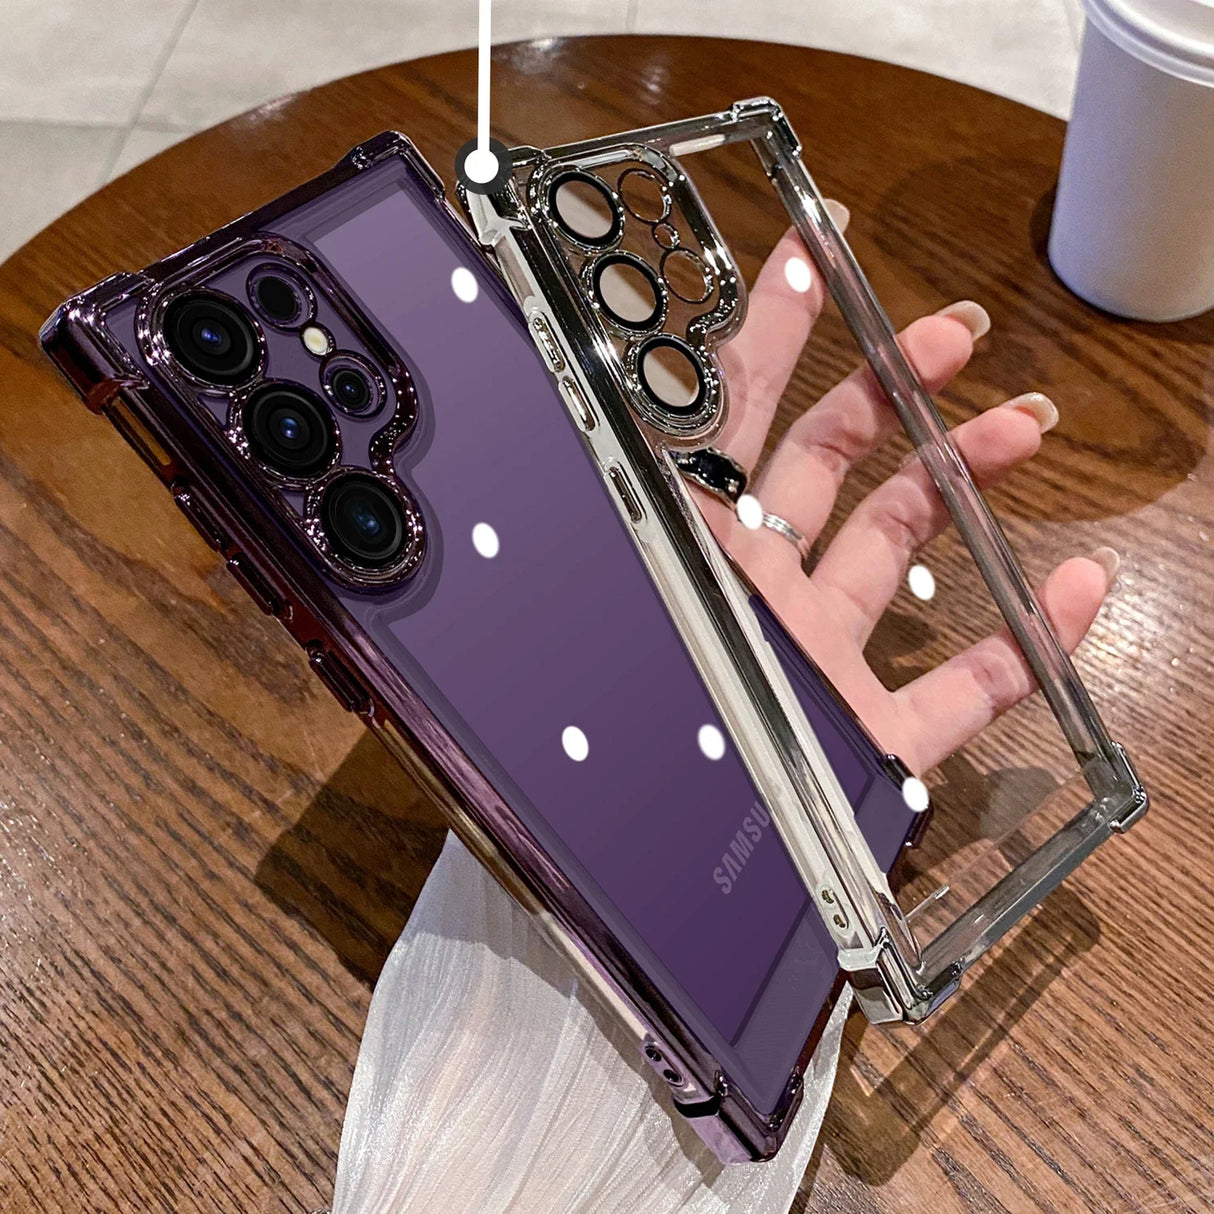 the back of a purple samsung phone case